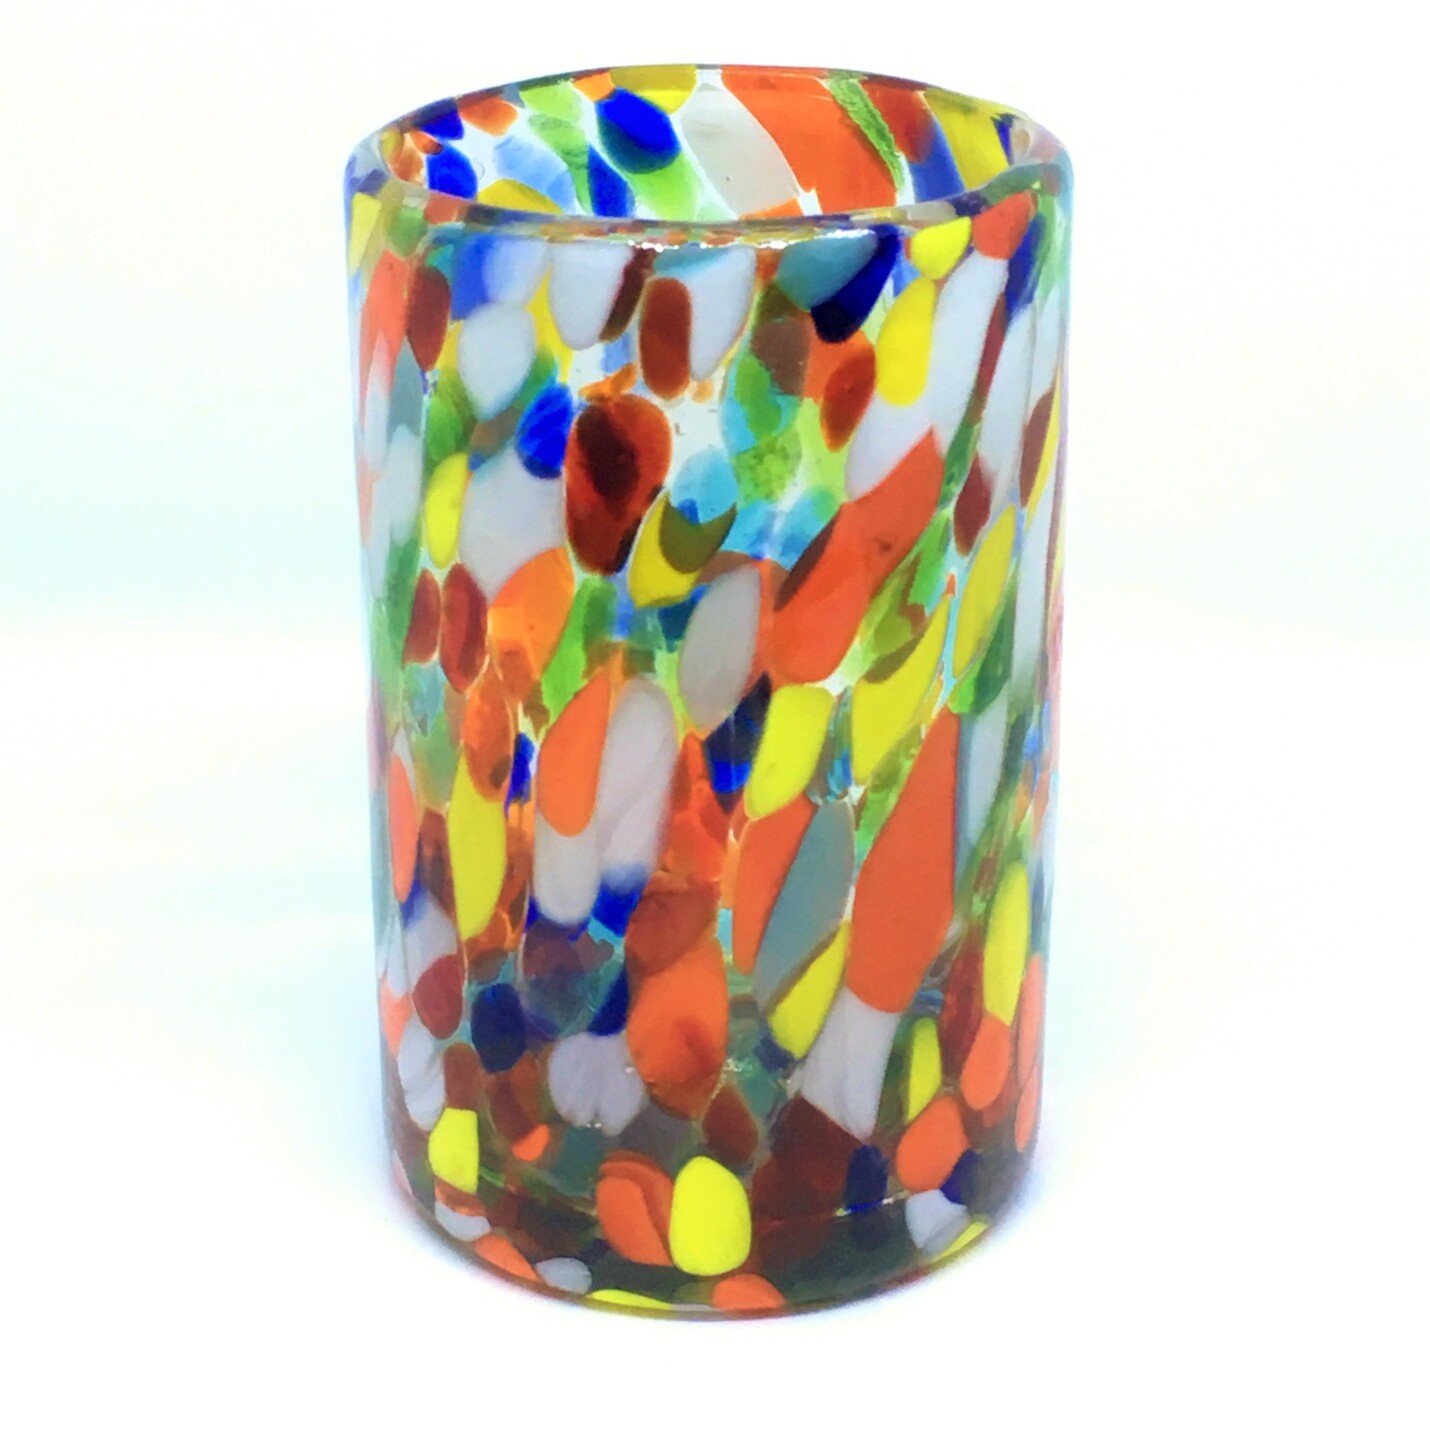 New Items / Confetti Carnival 14 oz Drinking Glasses (set of 6) / Let the spring come into your home with this colorful set of glasses. The multicolor glass decoration makes them a standout in any place.